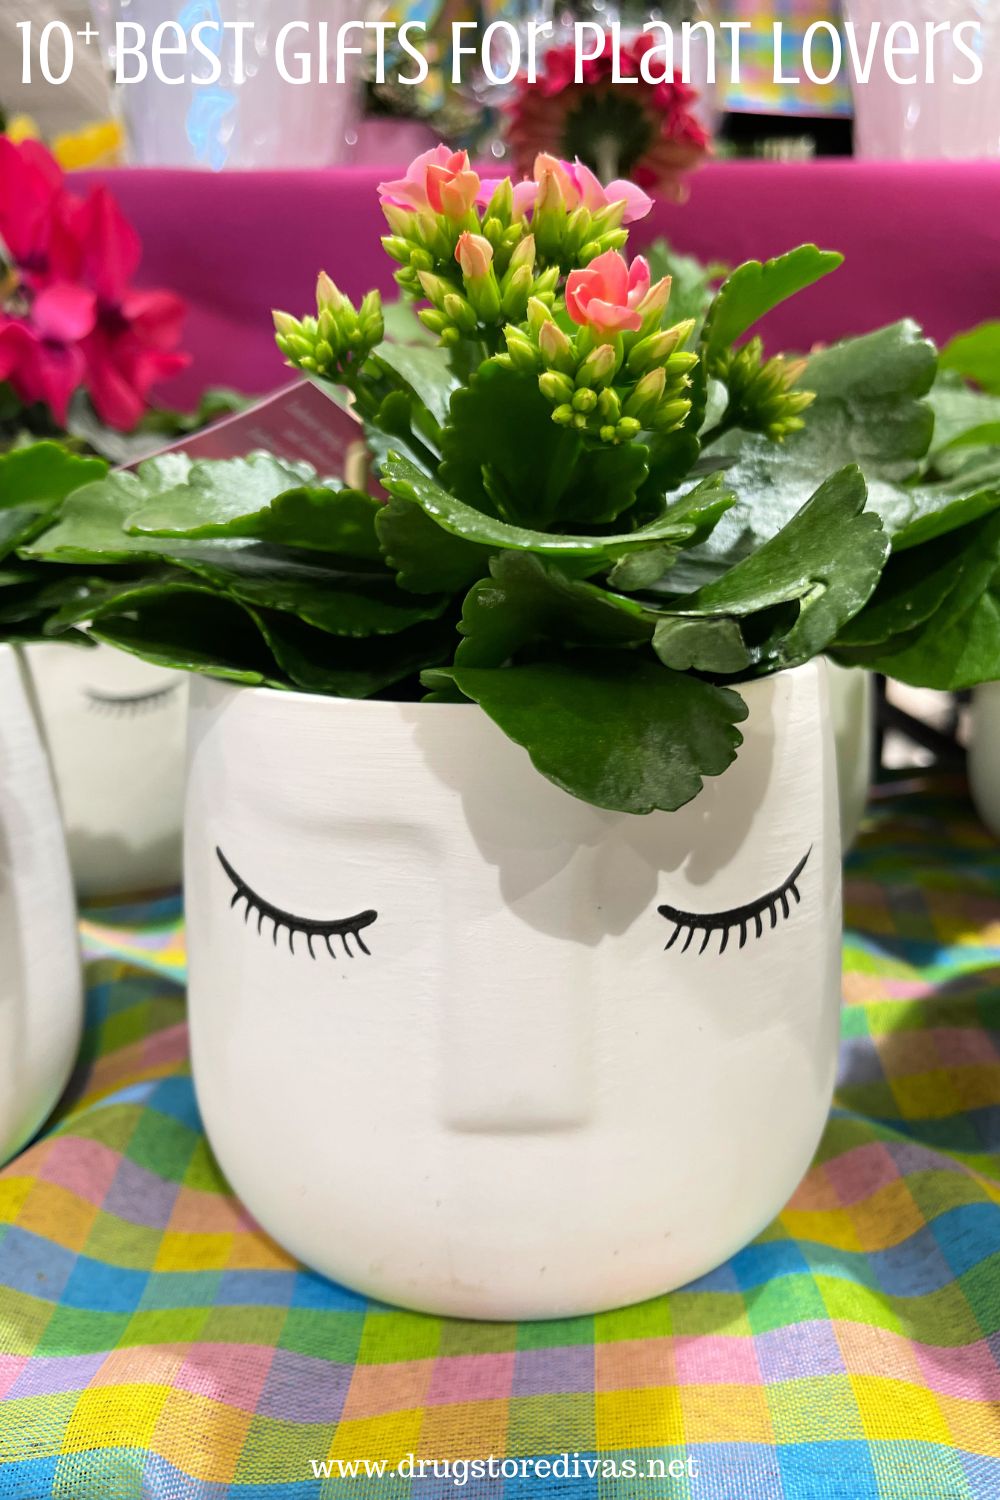 A face-shaped vase with a succulent in it with the words 